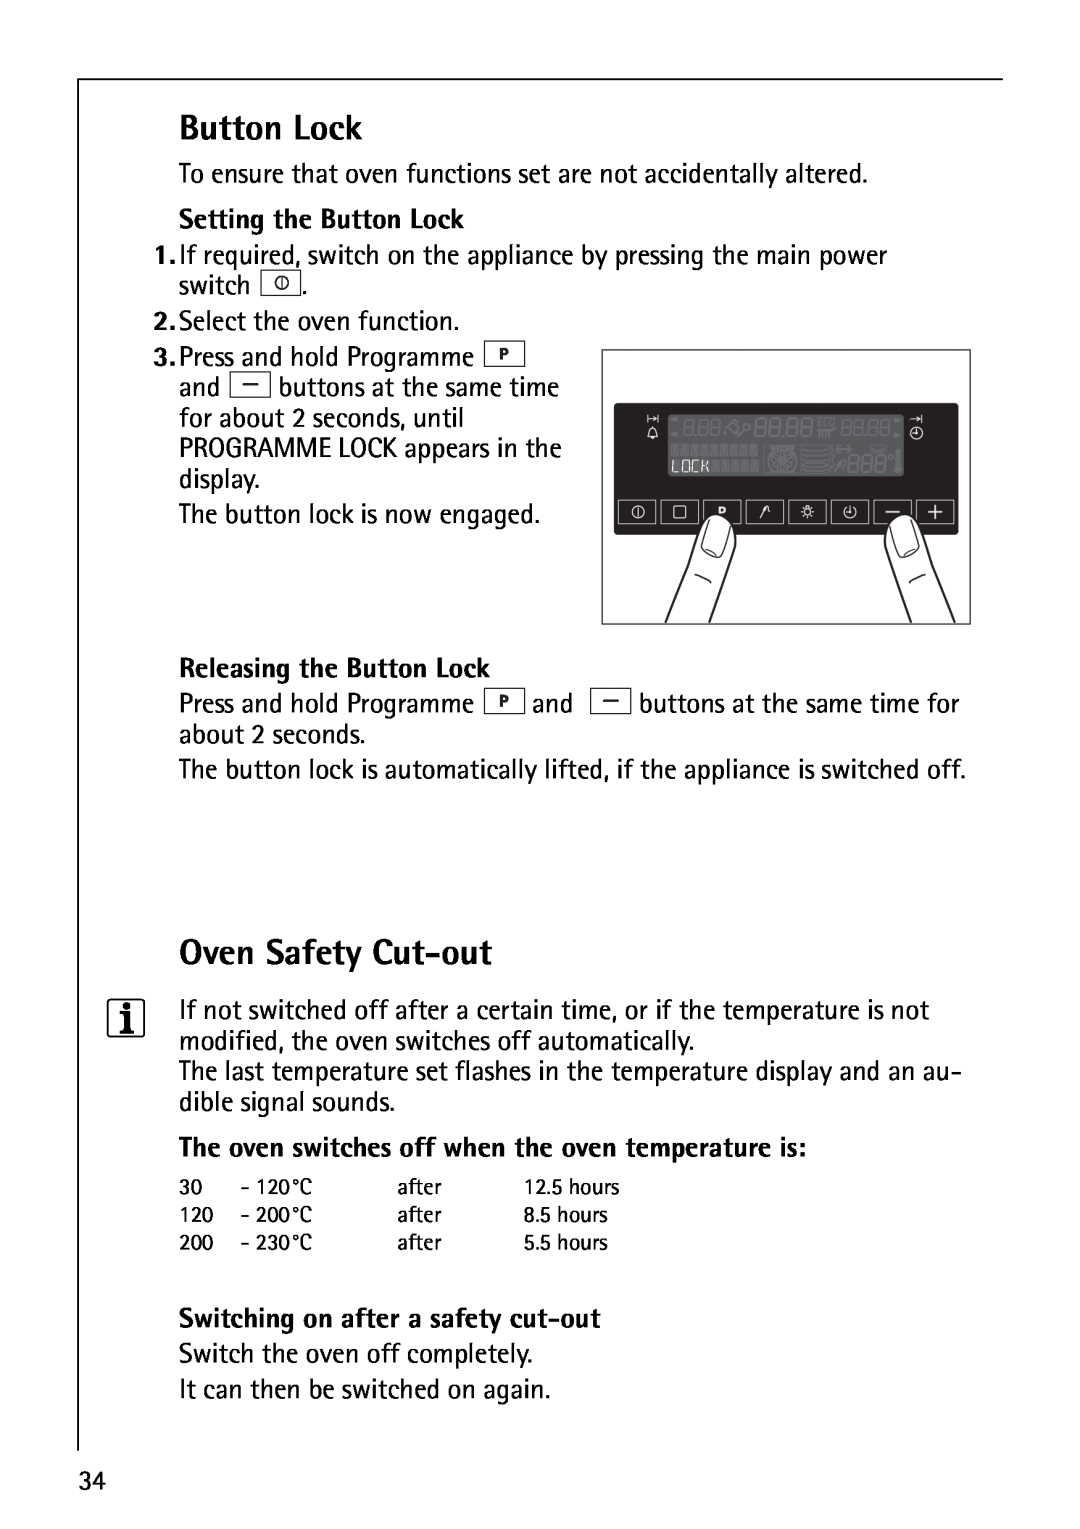 AEG B8920-1 manual Oven Safety Cut-out, Setting the Button Lock, Releasing the Button Lock 